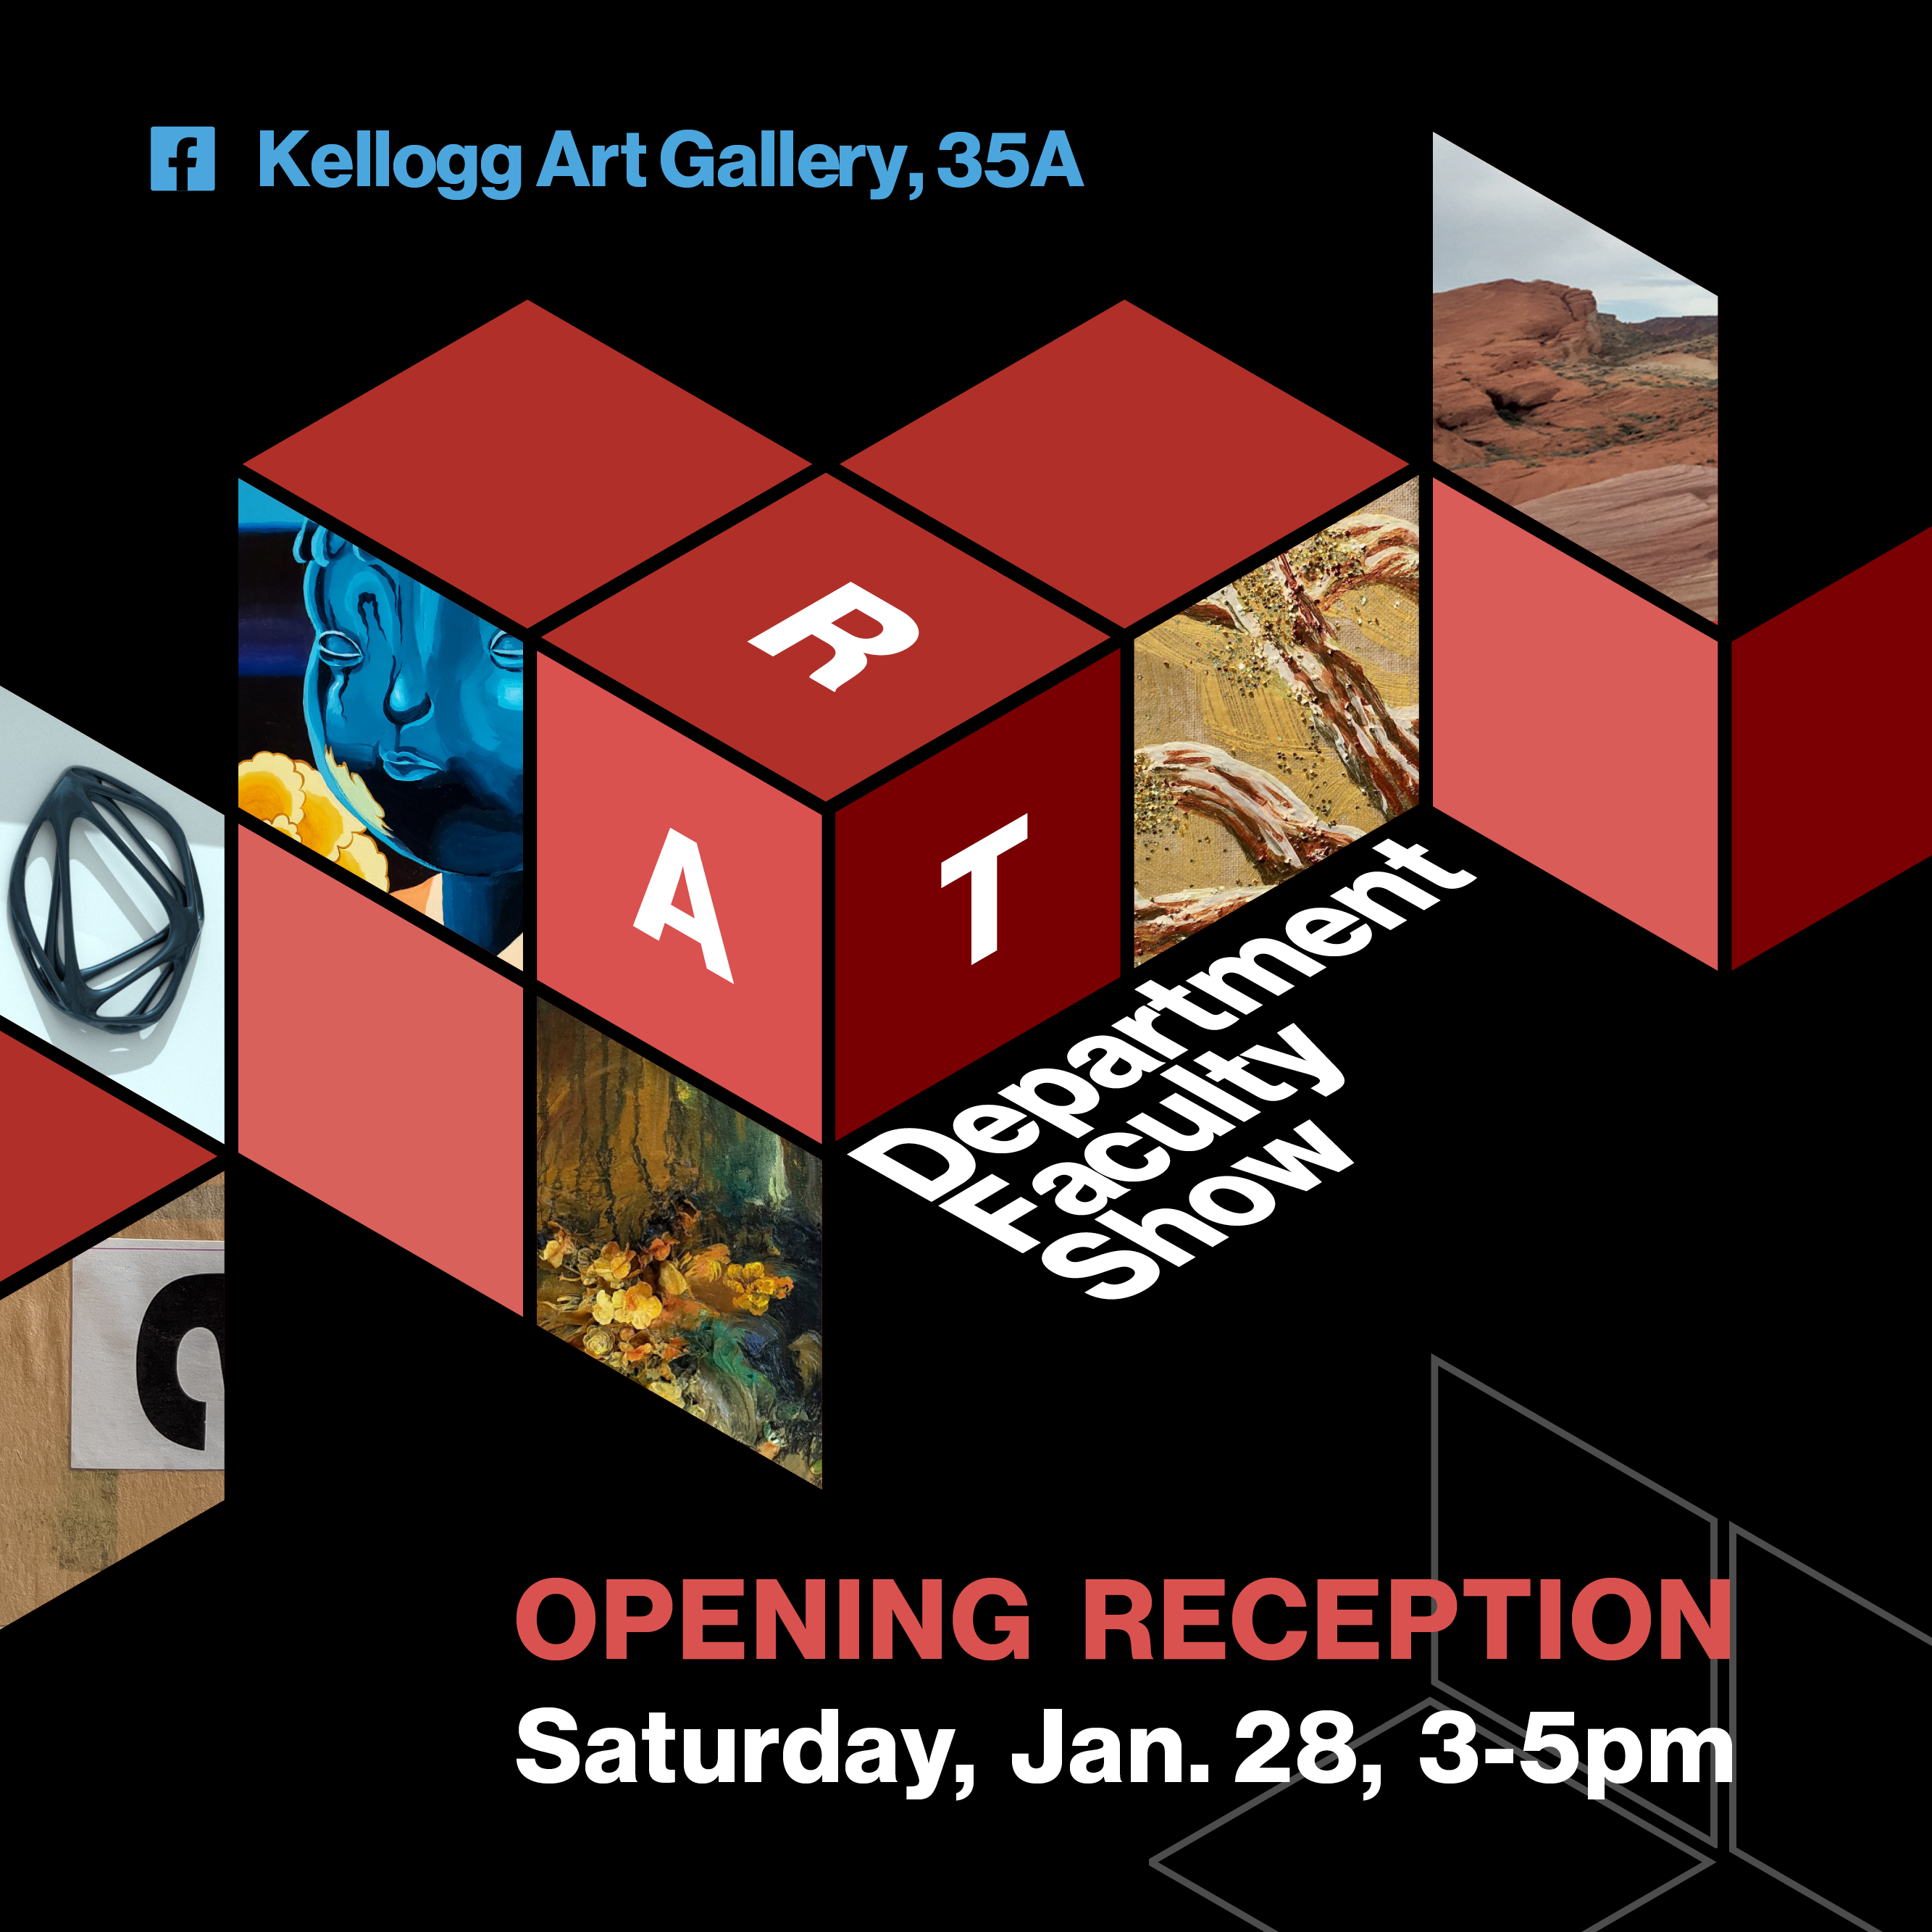 Kellogg art gallery art department faculty show opening reception Saturday January 28, 3-5 pm